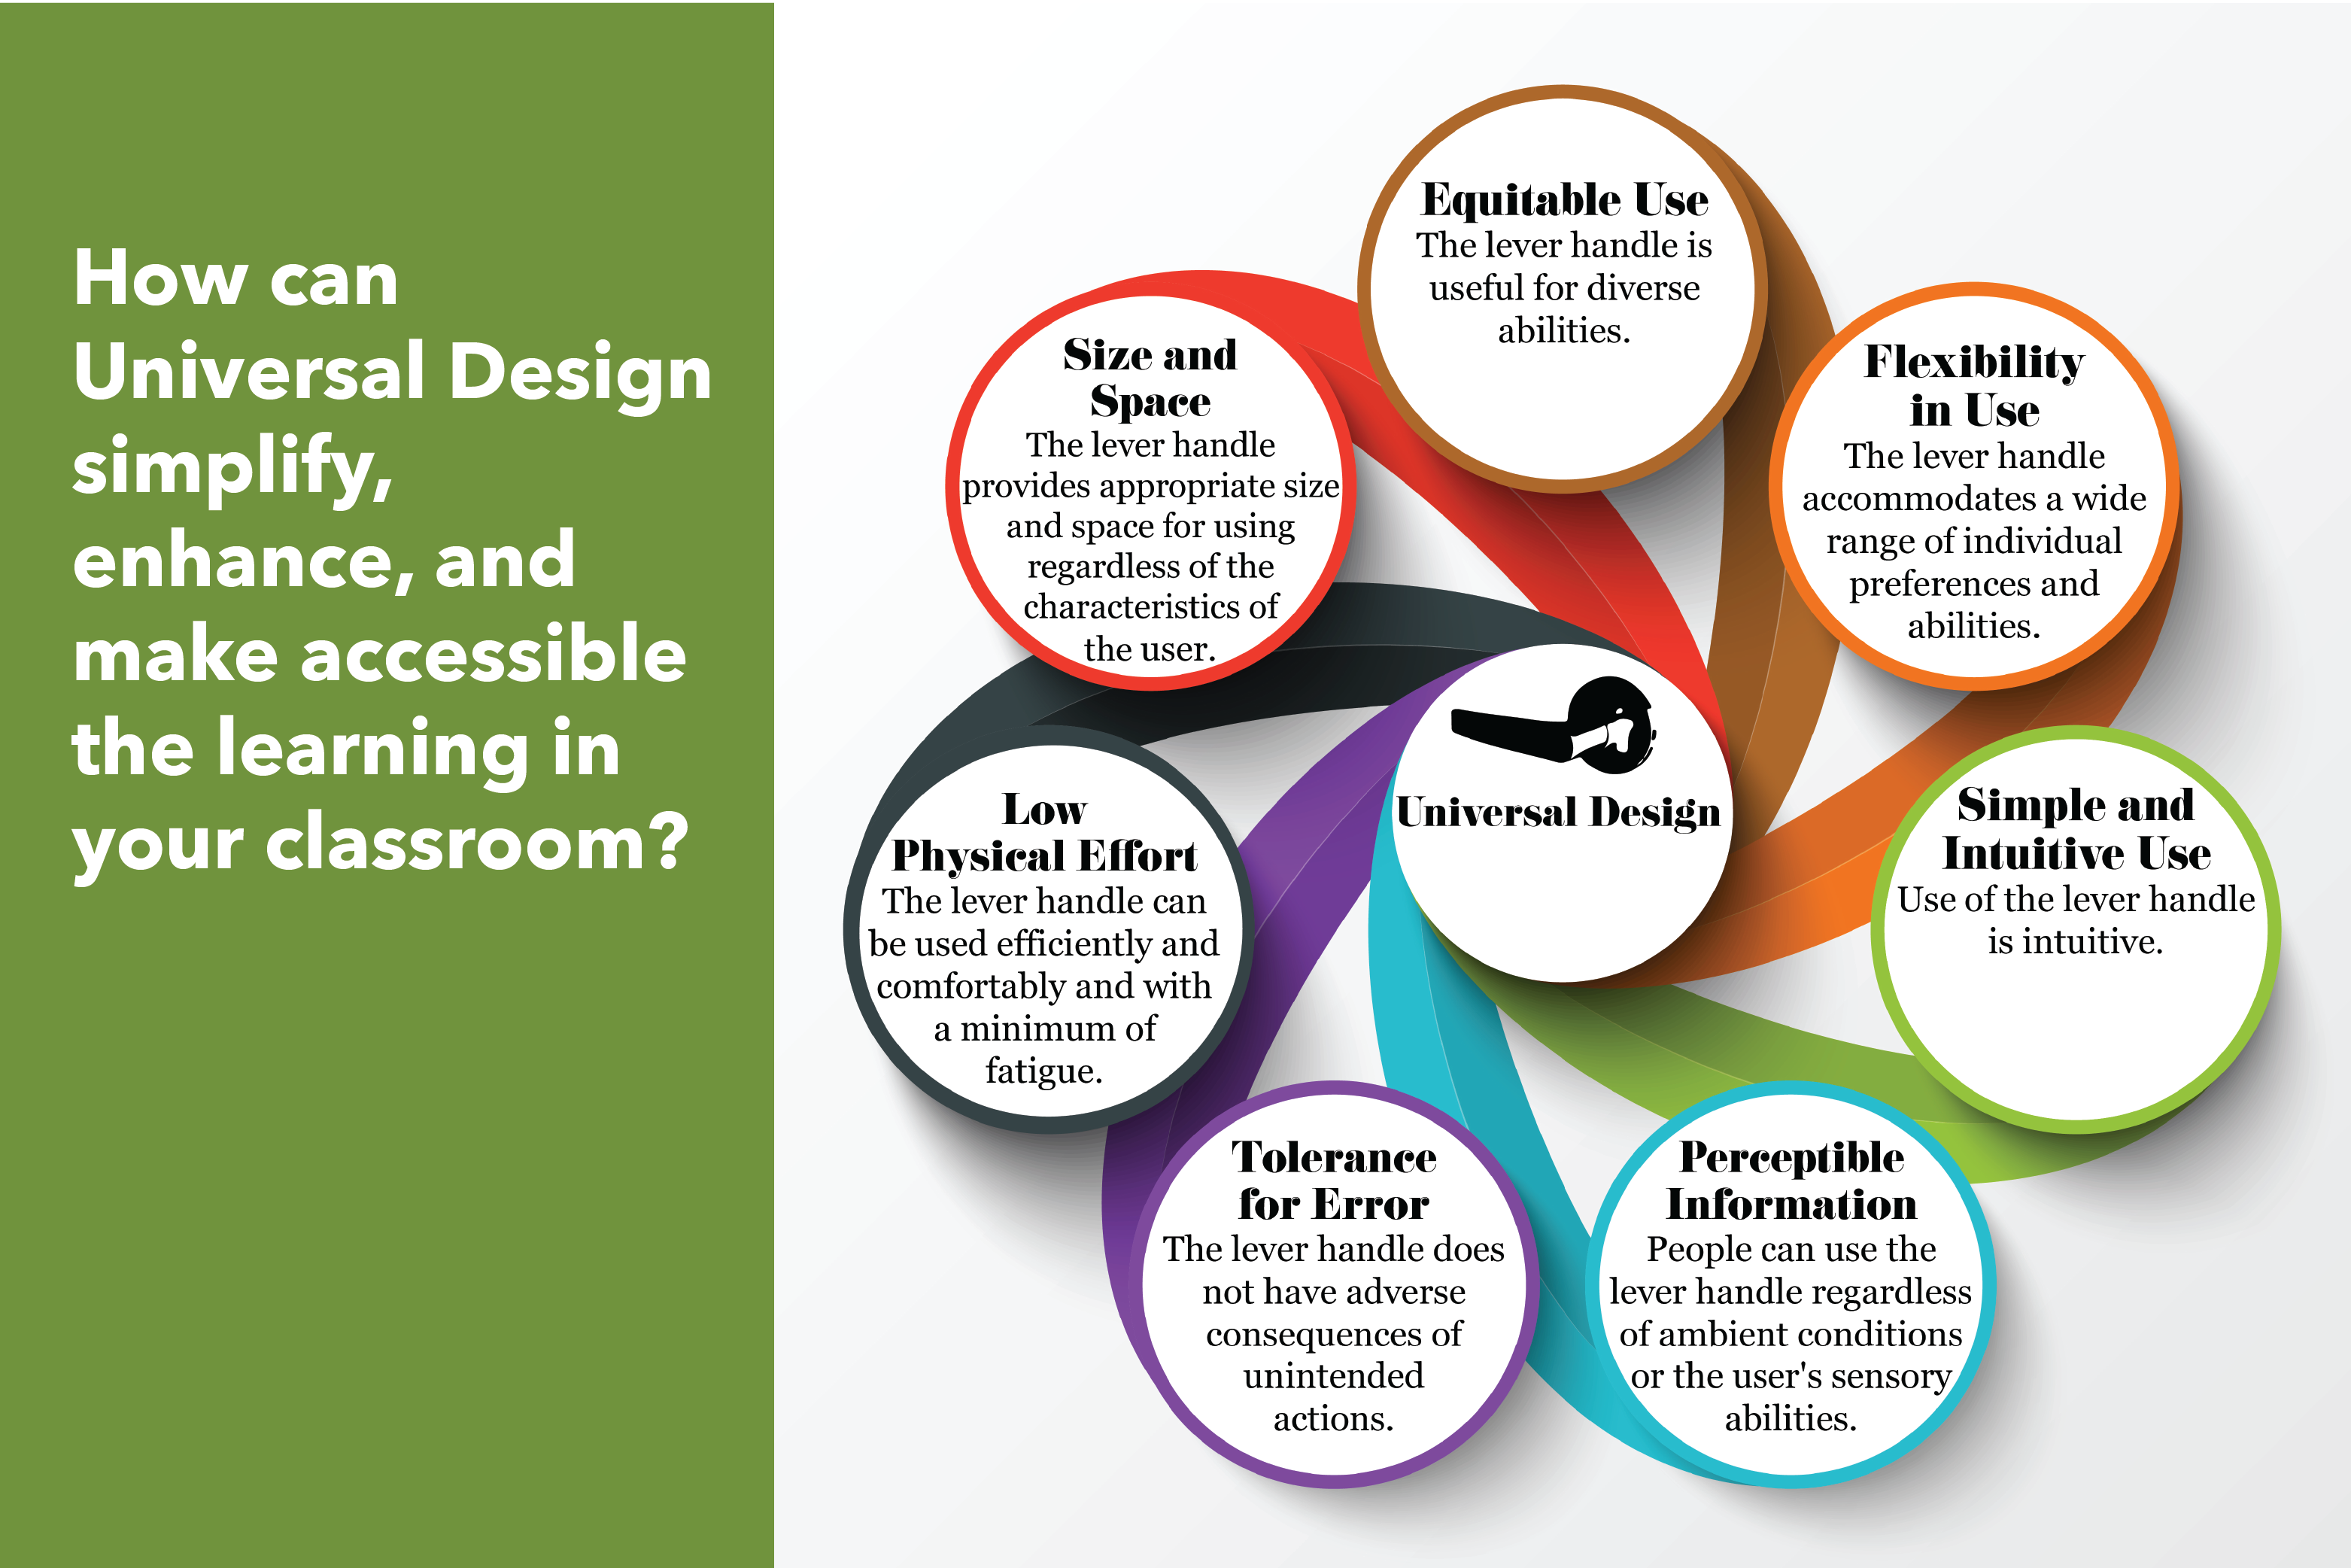 "Universal Design in the Classroom: Quick Tips to Try" with an infographic of the 7 principles of Universal Design applied to a door handle lever.